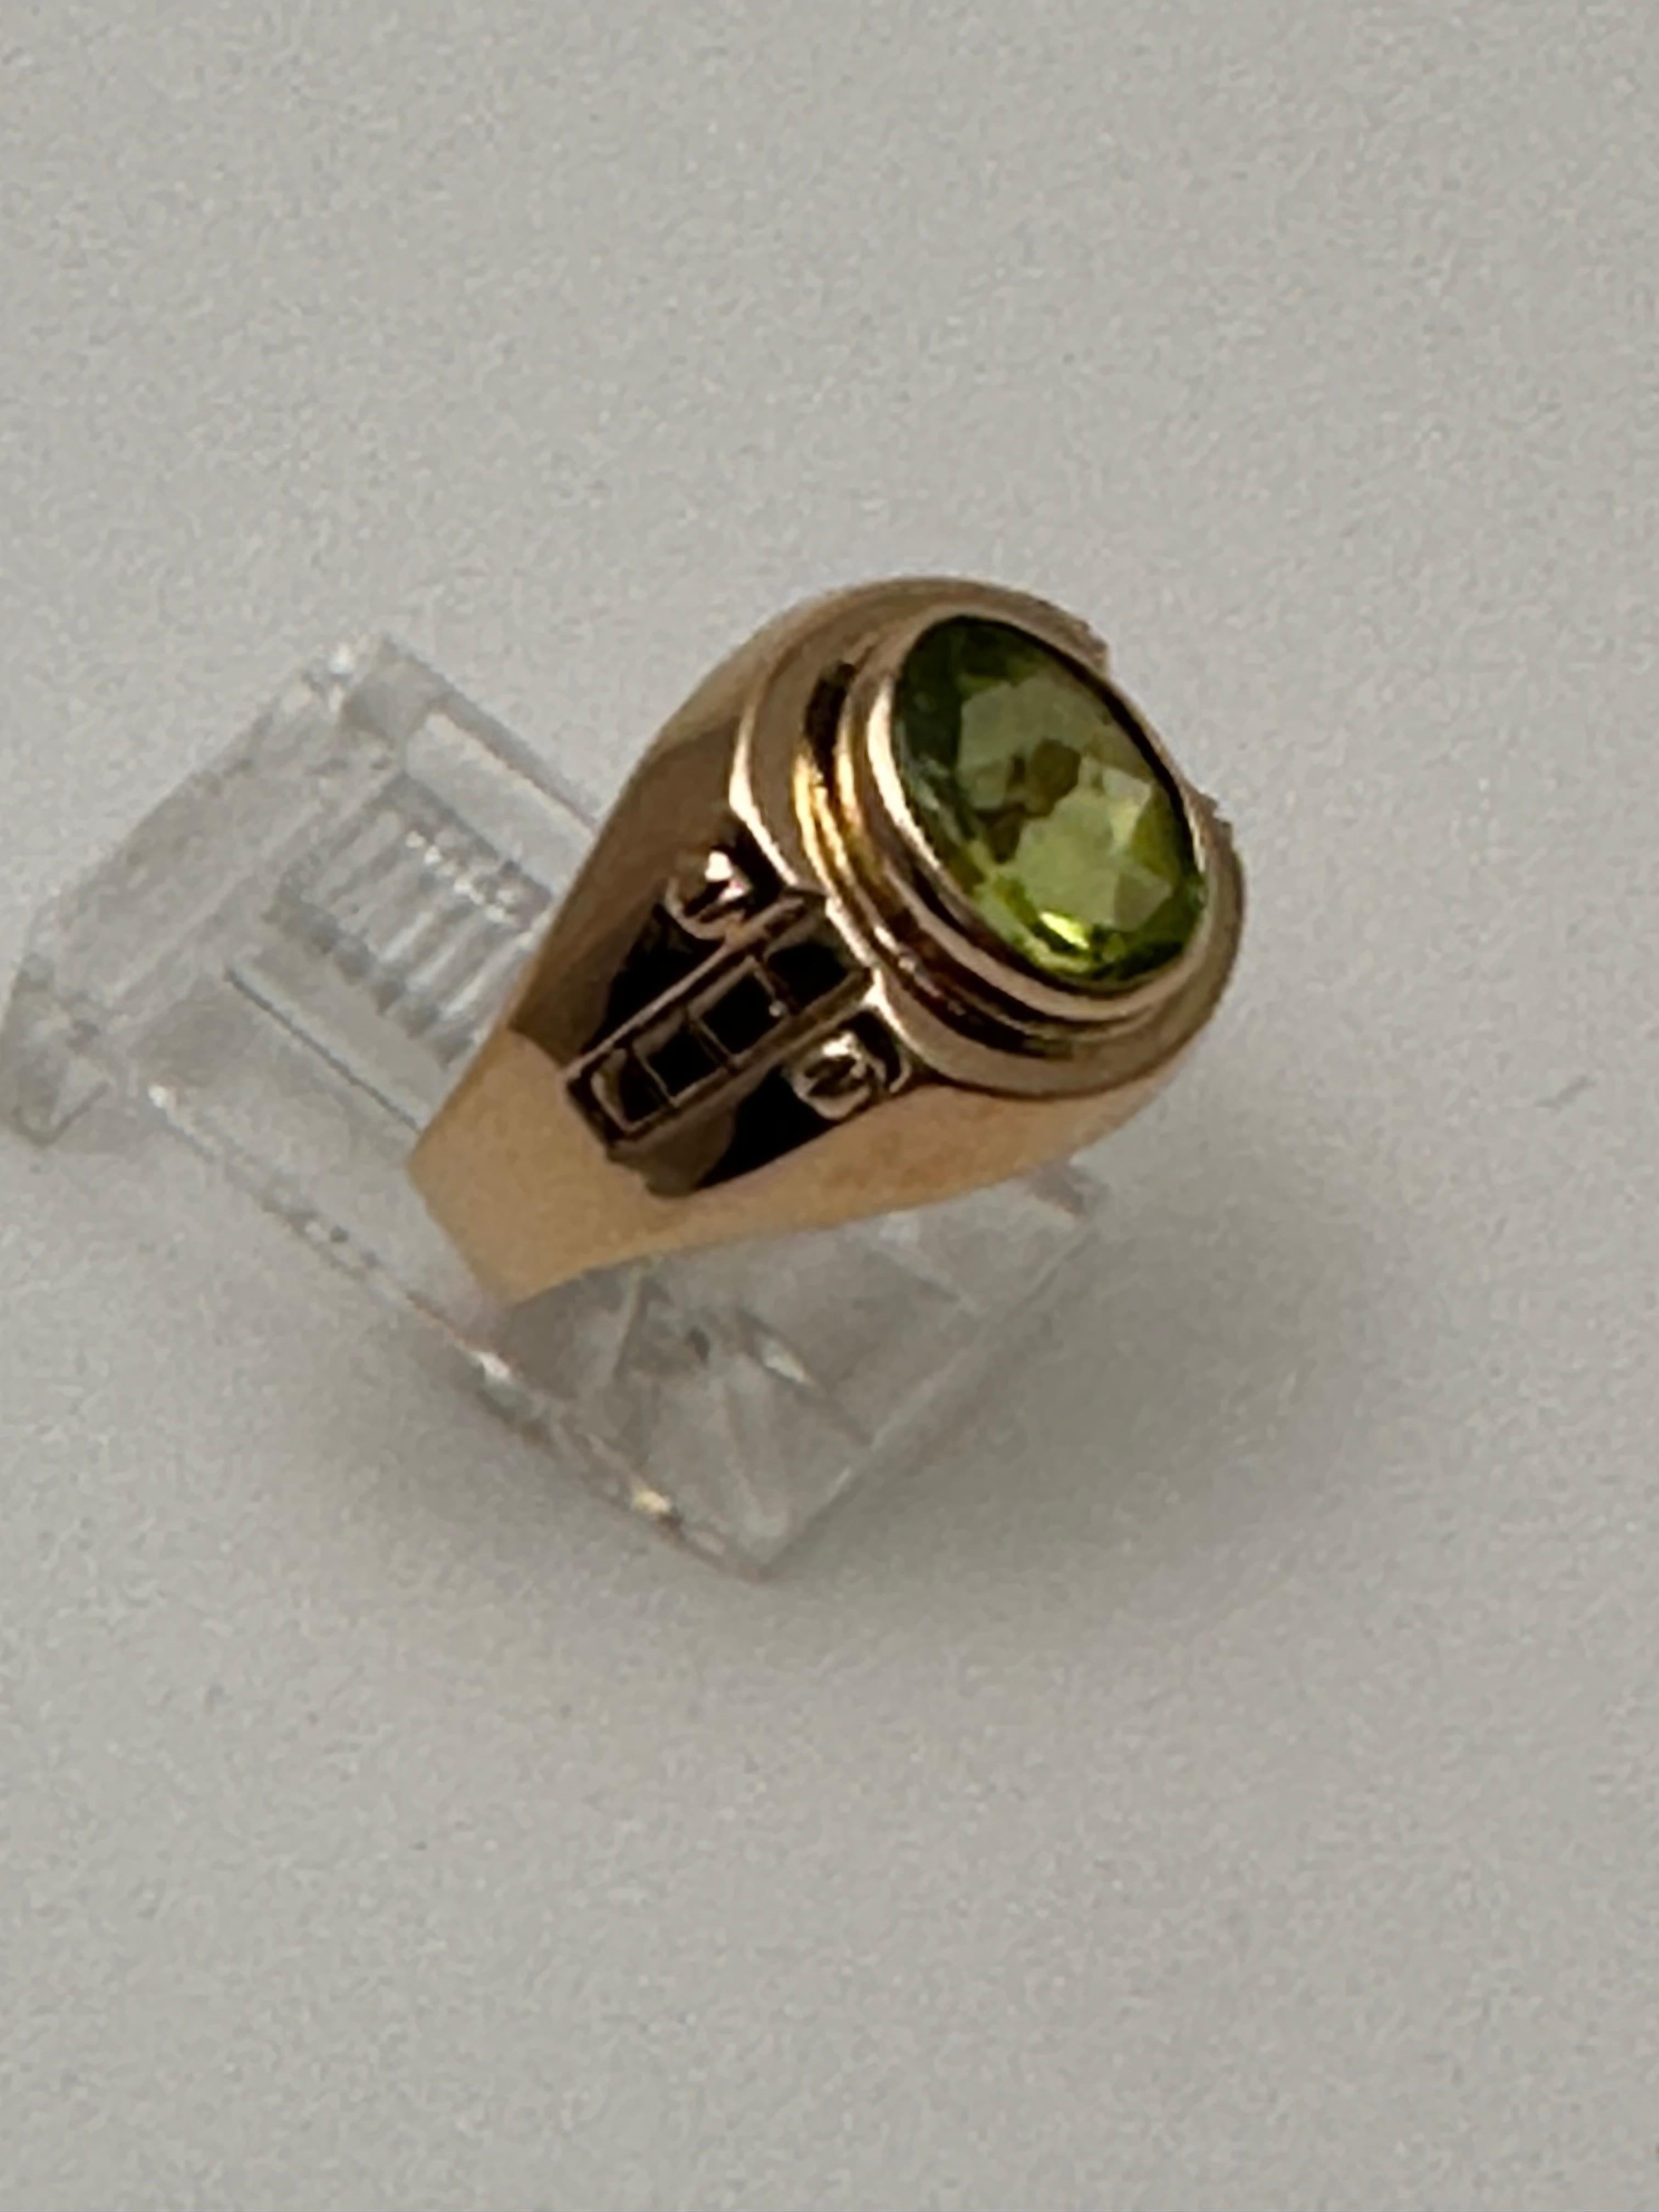 21kt Yellow Gold 8mm x 9mm Oval Peridot Ring Size 5 3/4 For Sale 2